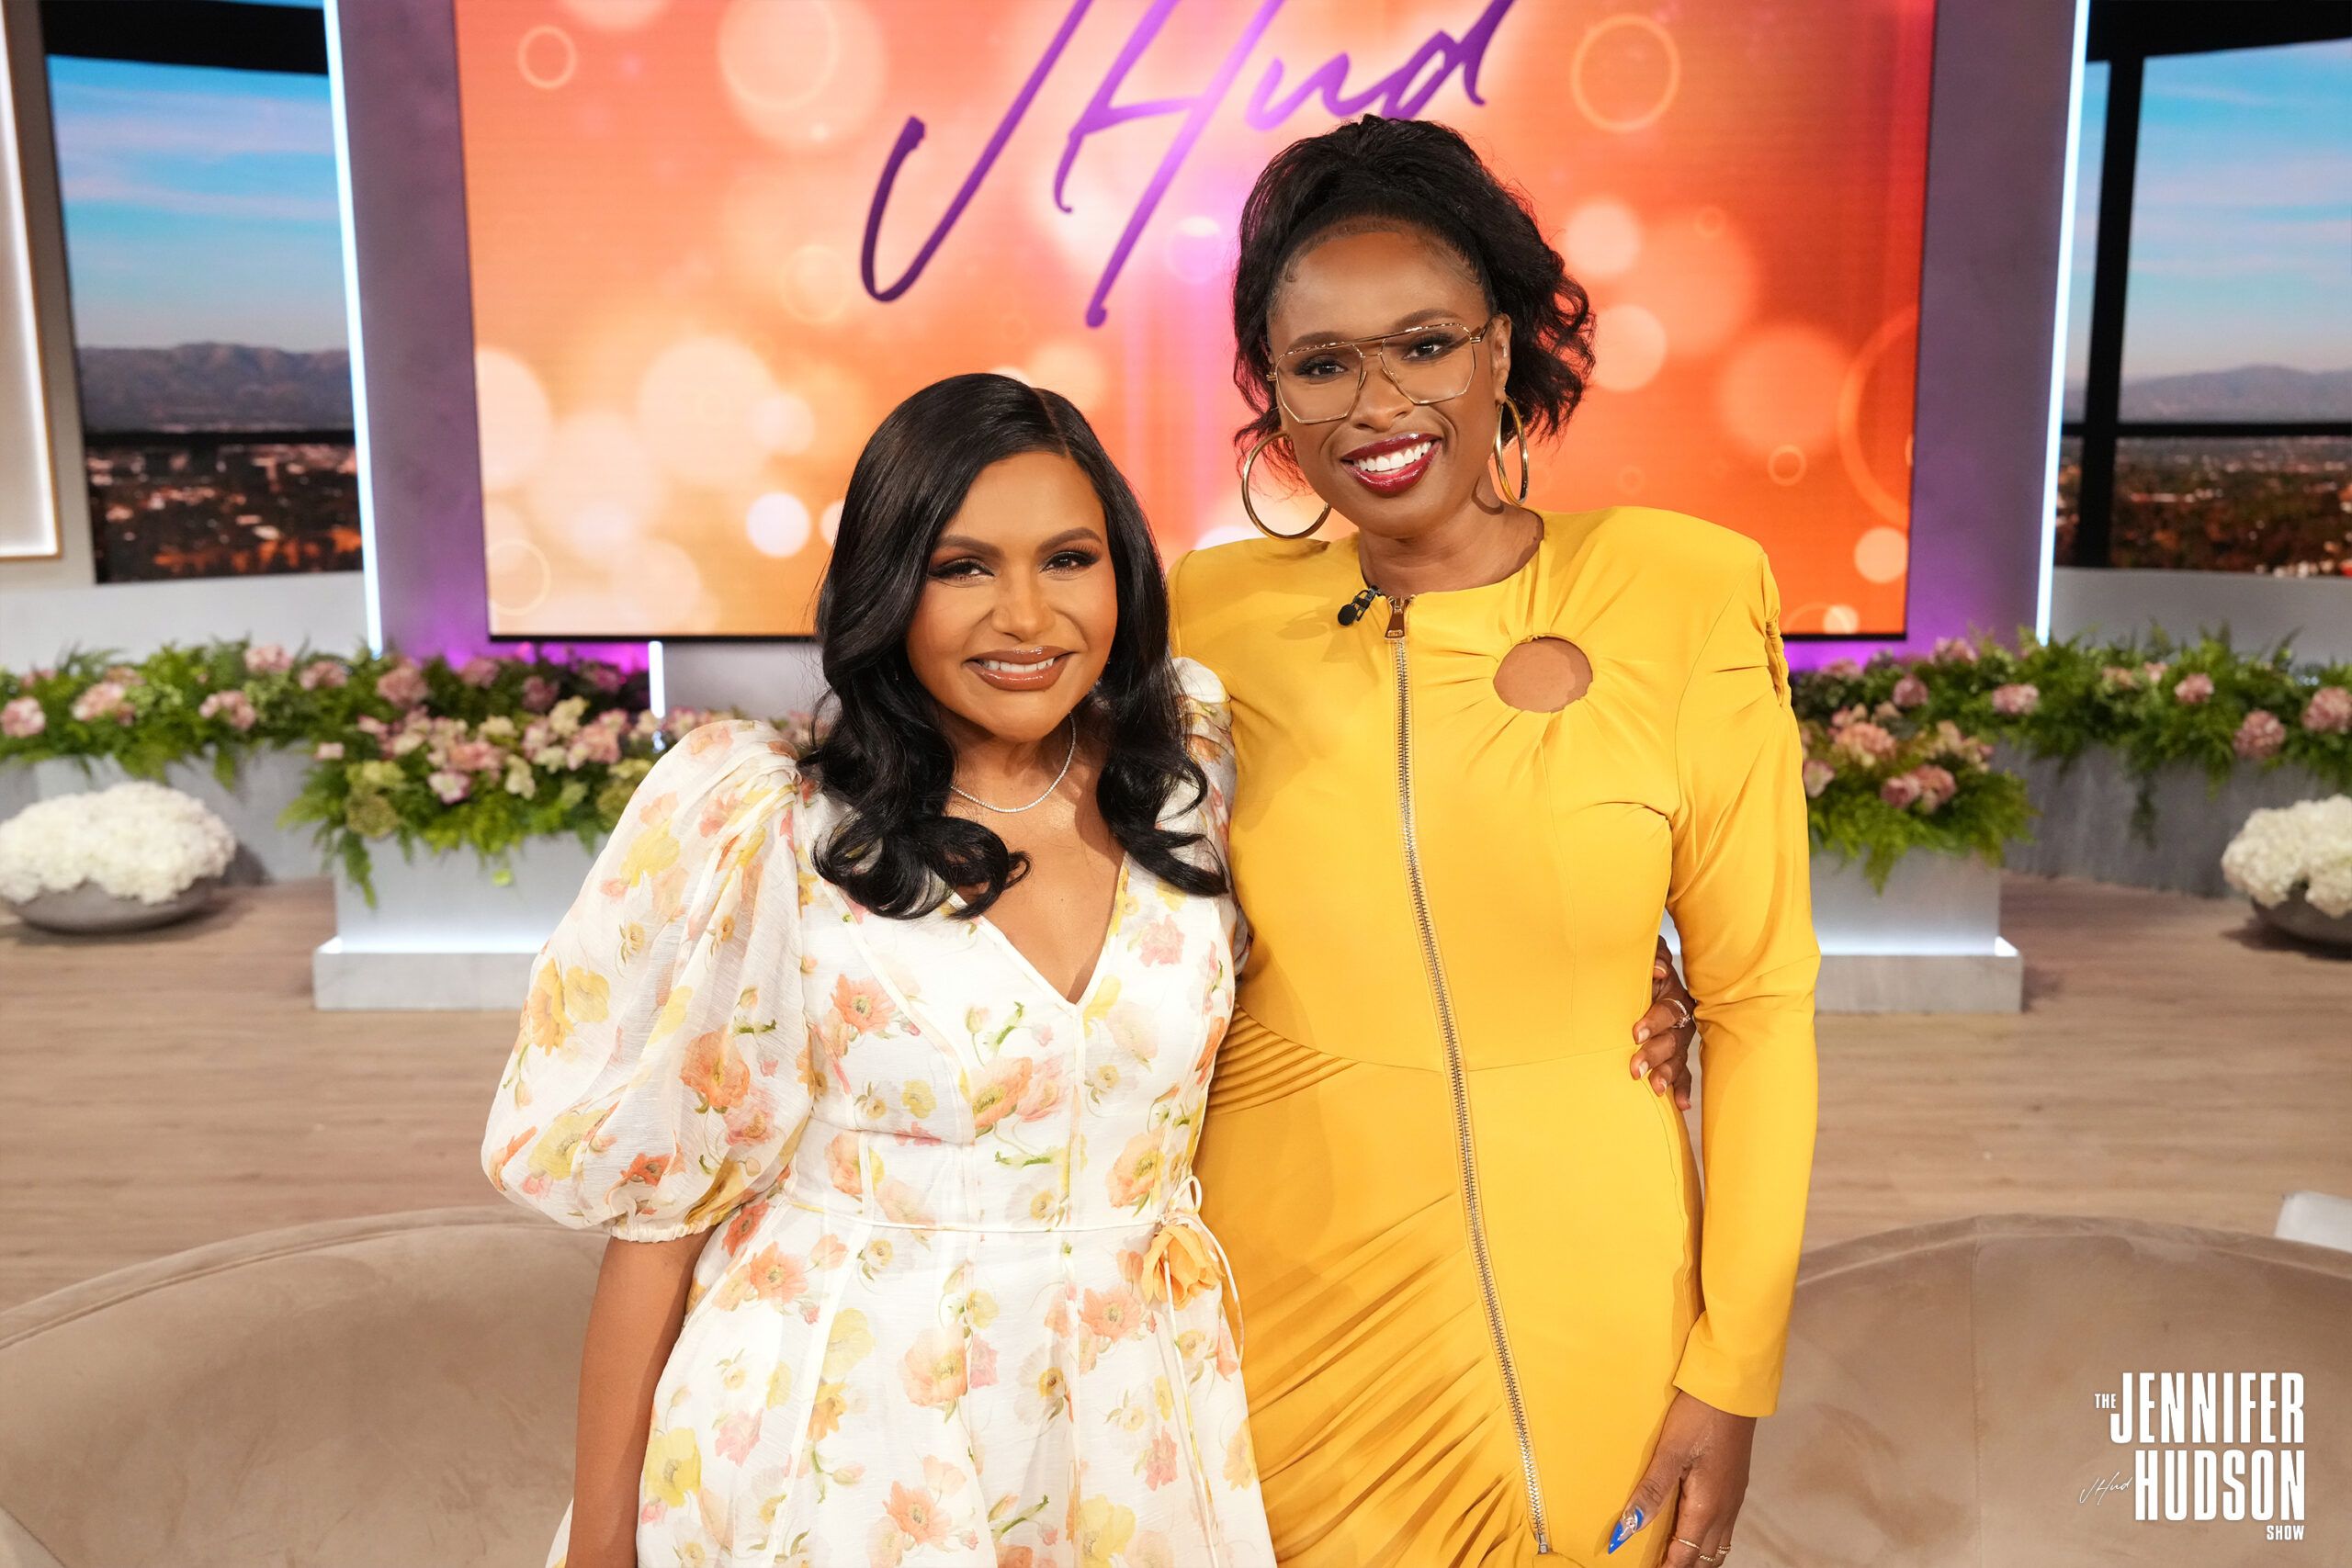 Mindy Kaling Talks about Whether Her Kids Will Follow Her Into Show Business